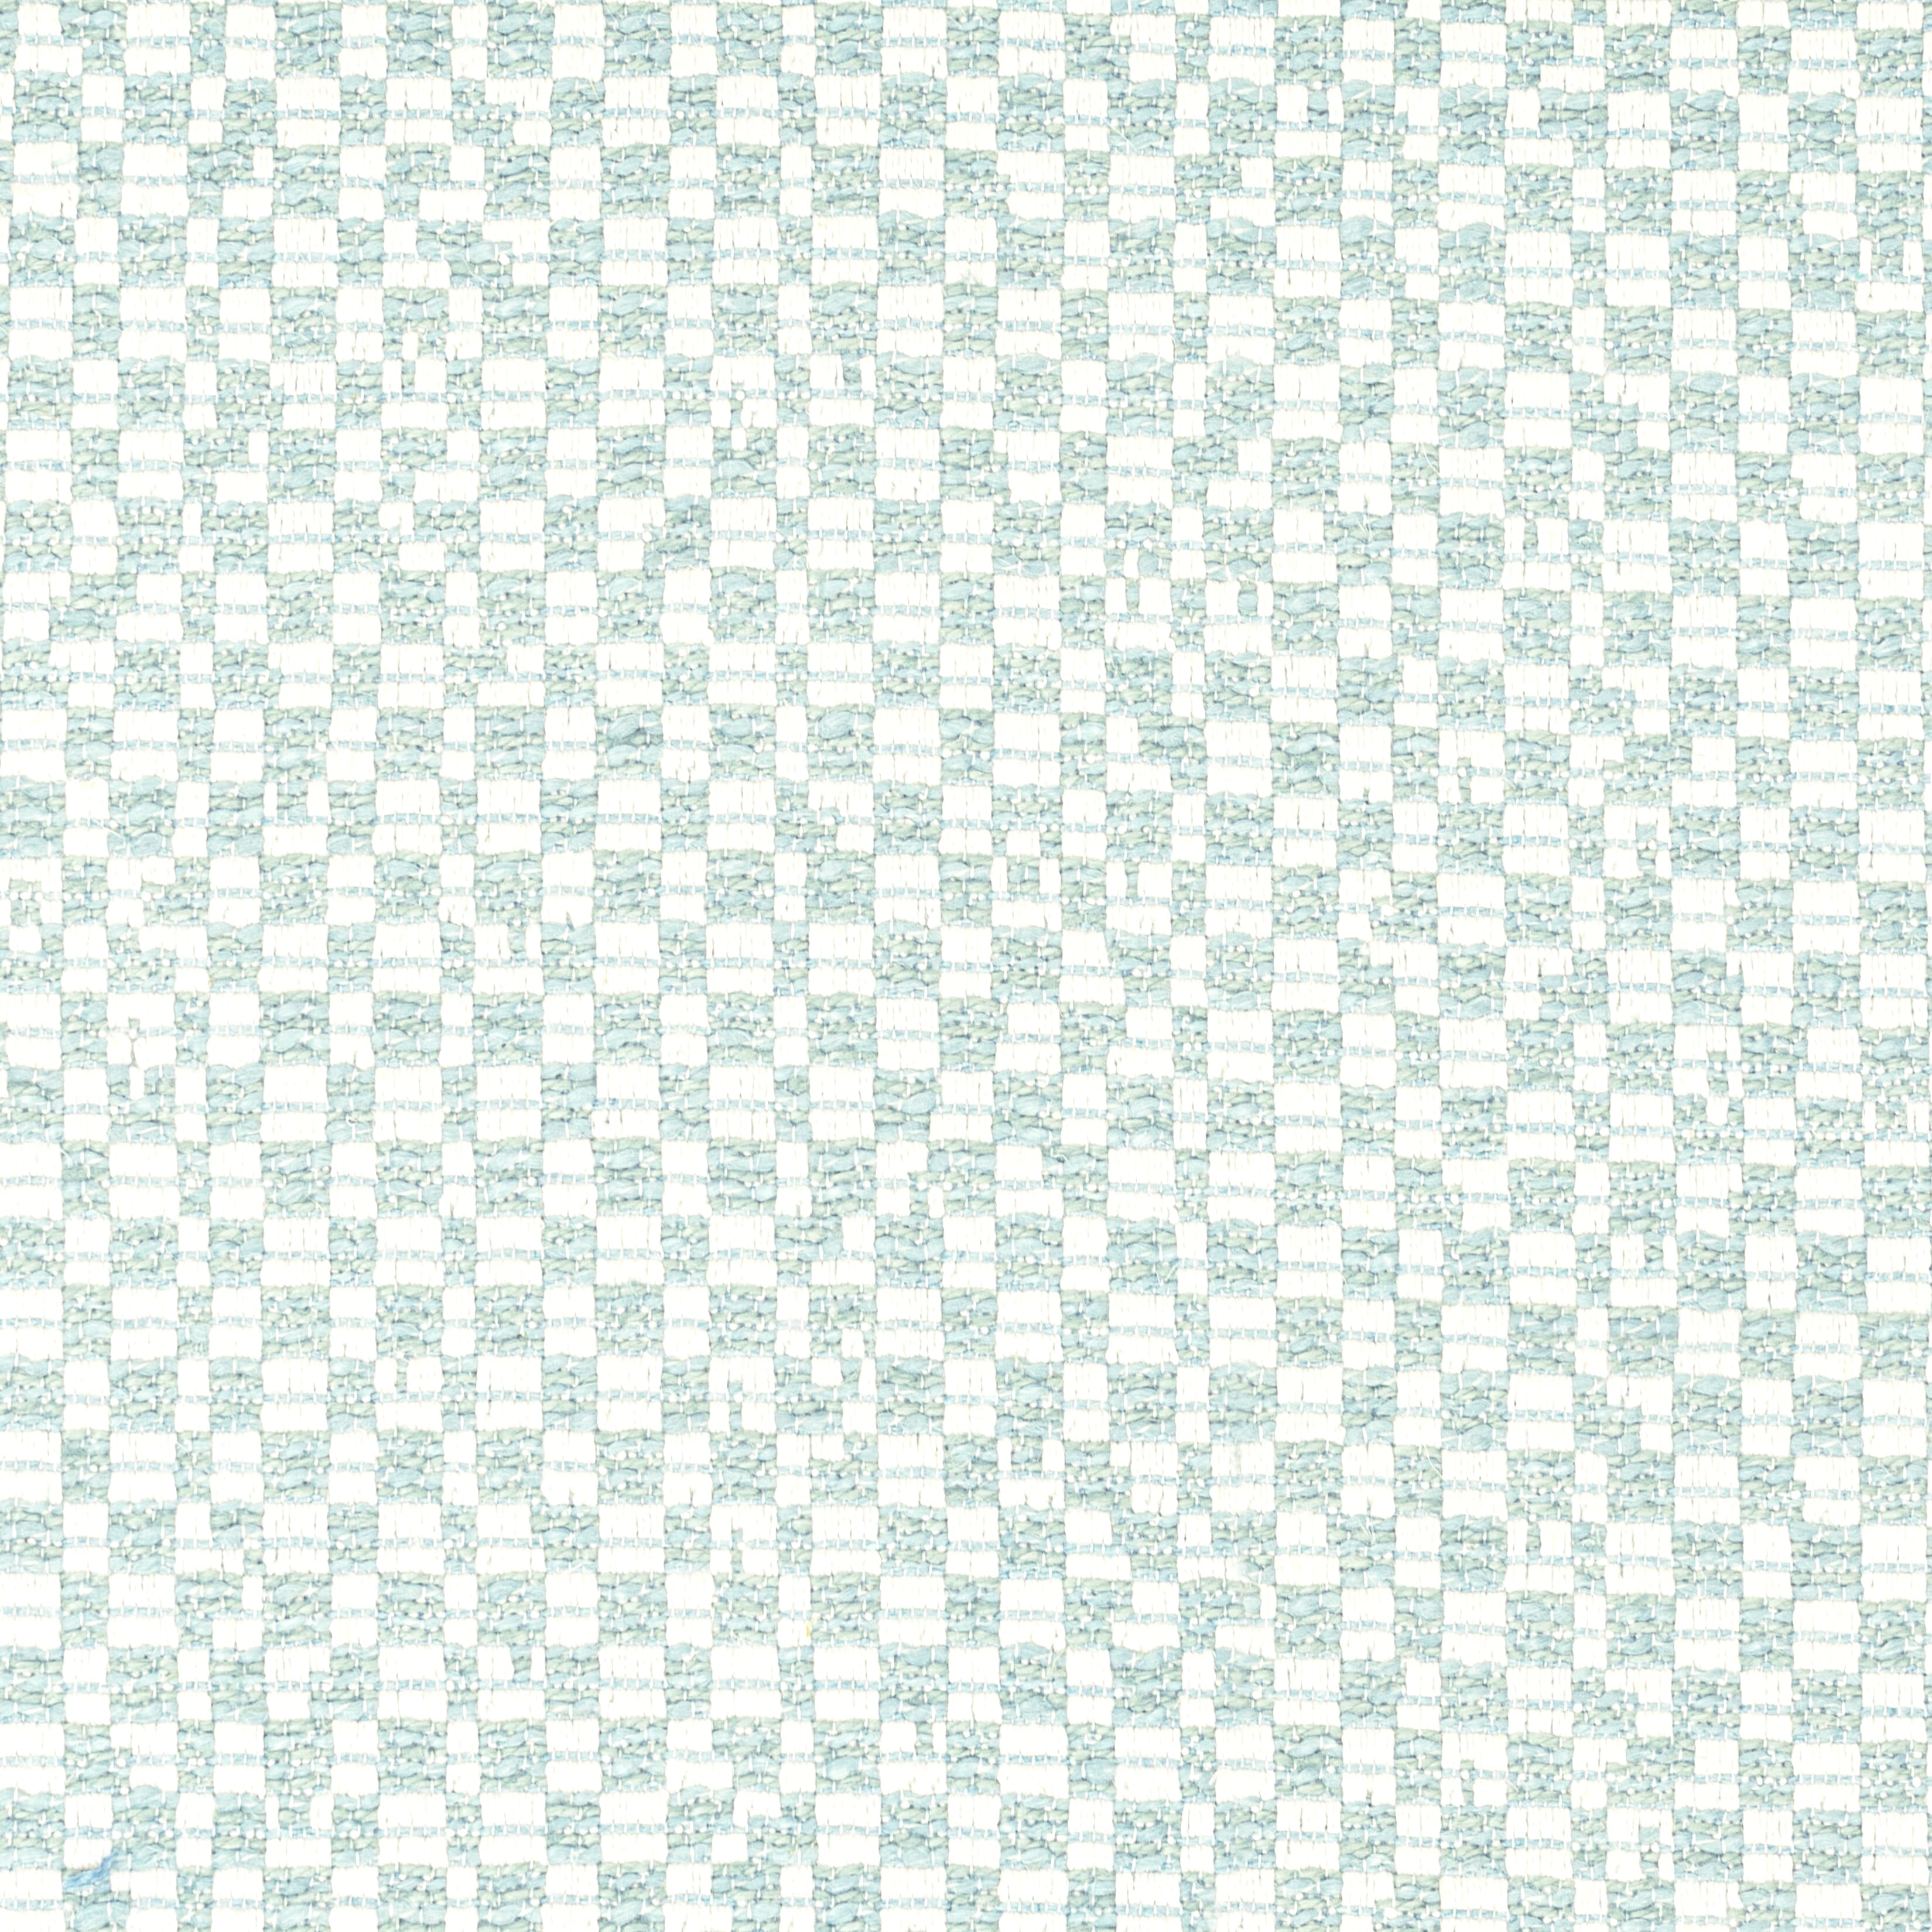 7803-4 Foundation Breeze by Stout Fabric